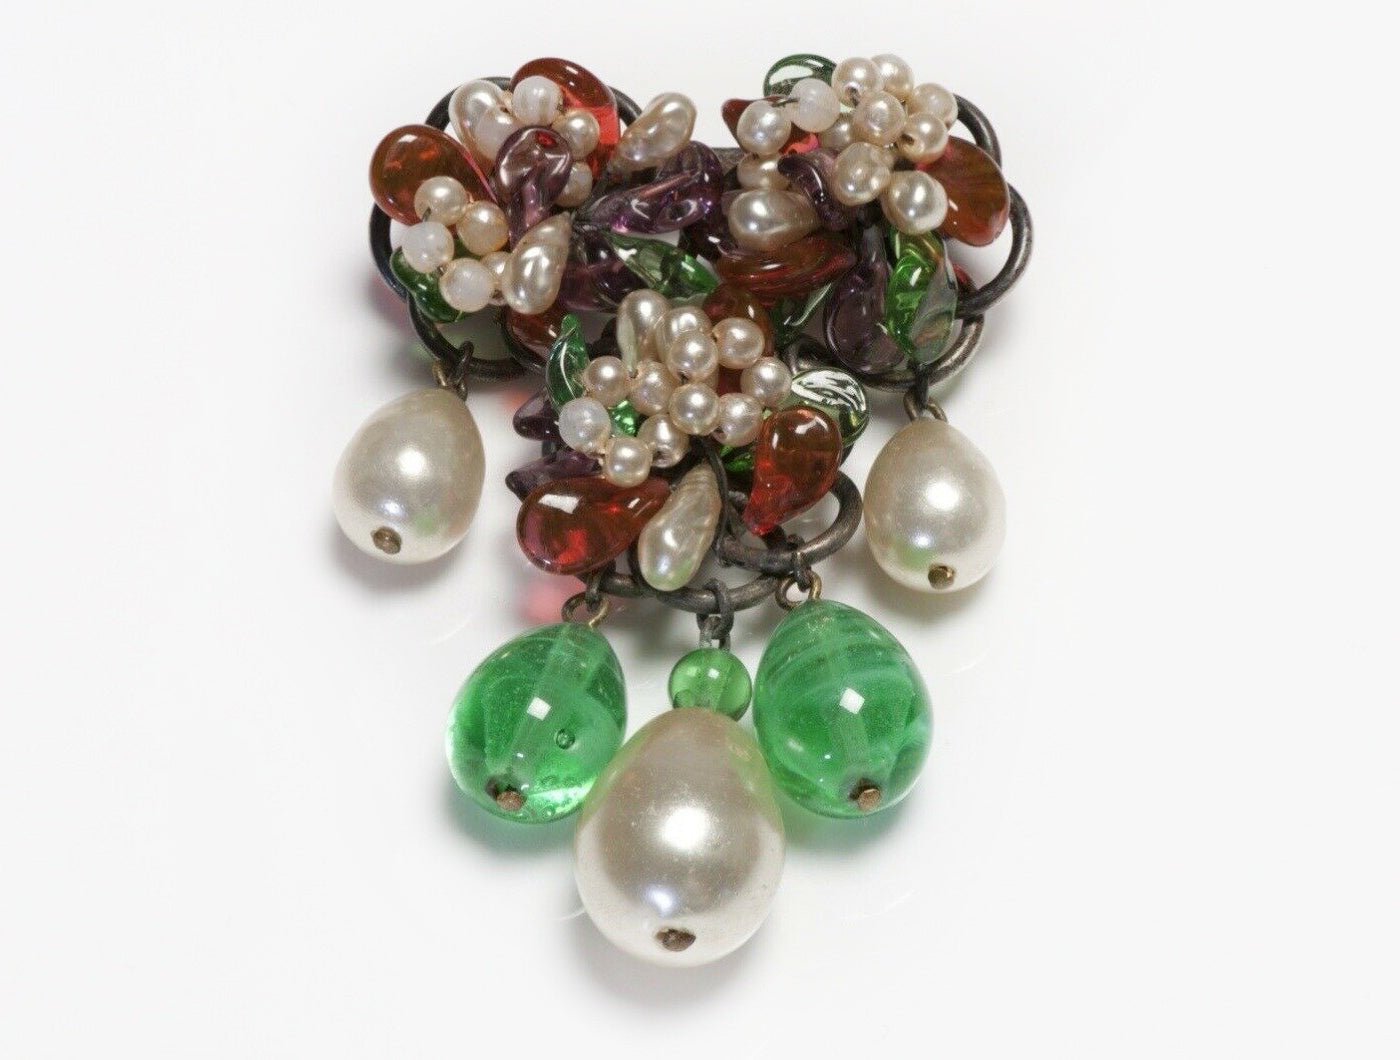 Chanel Paris by Louis Rousselet 1930's Green Red Poured Glass Flower Brooch